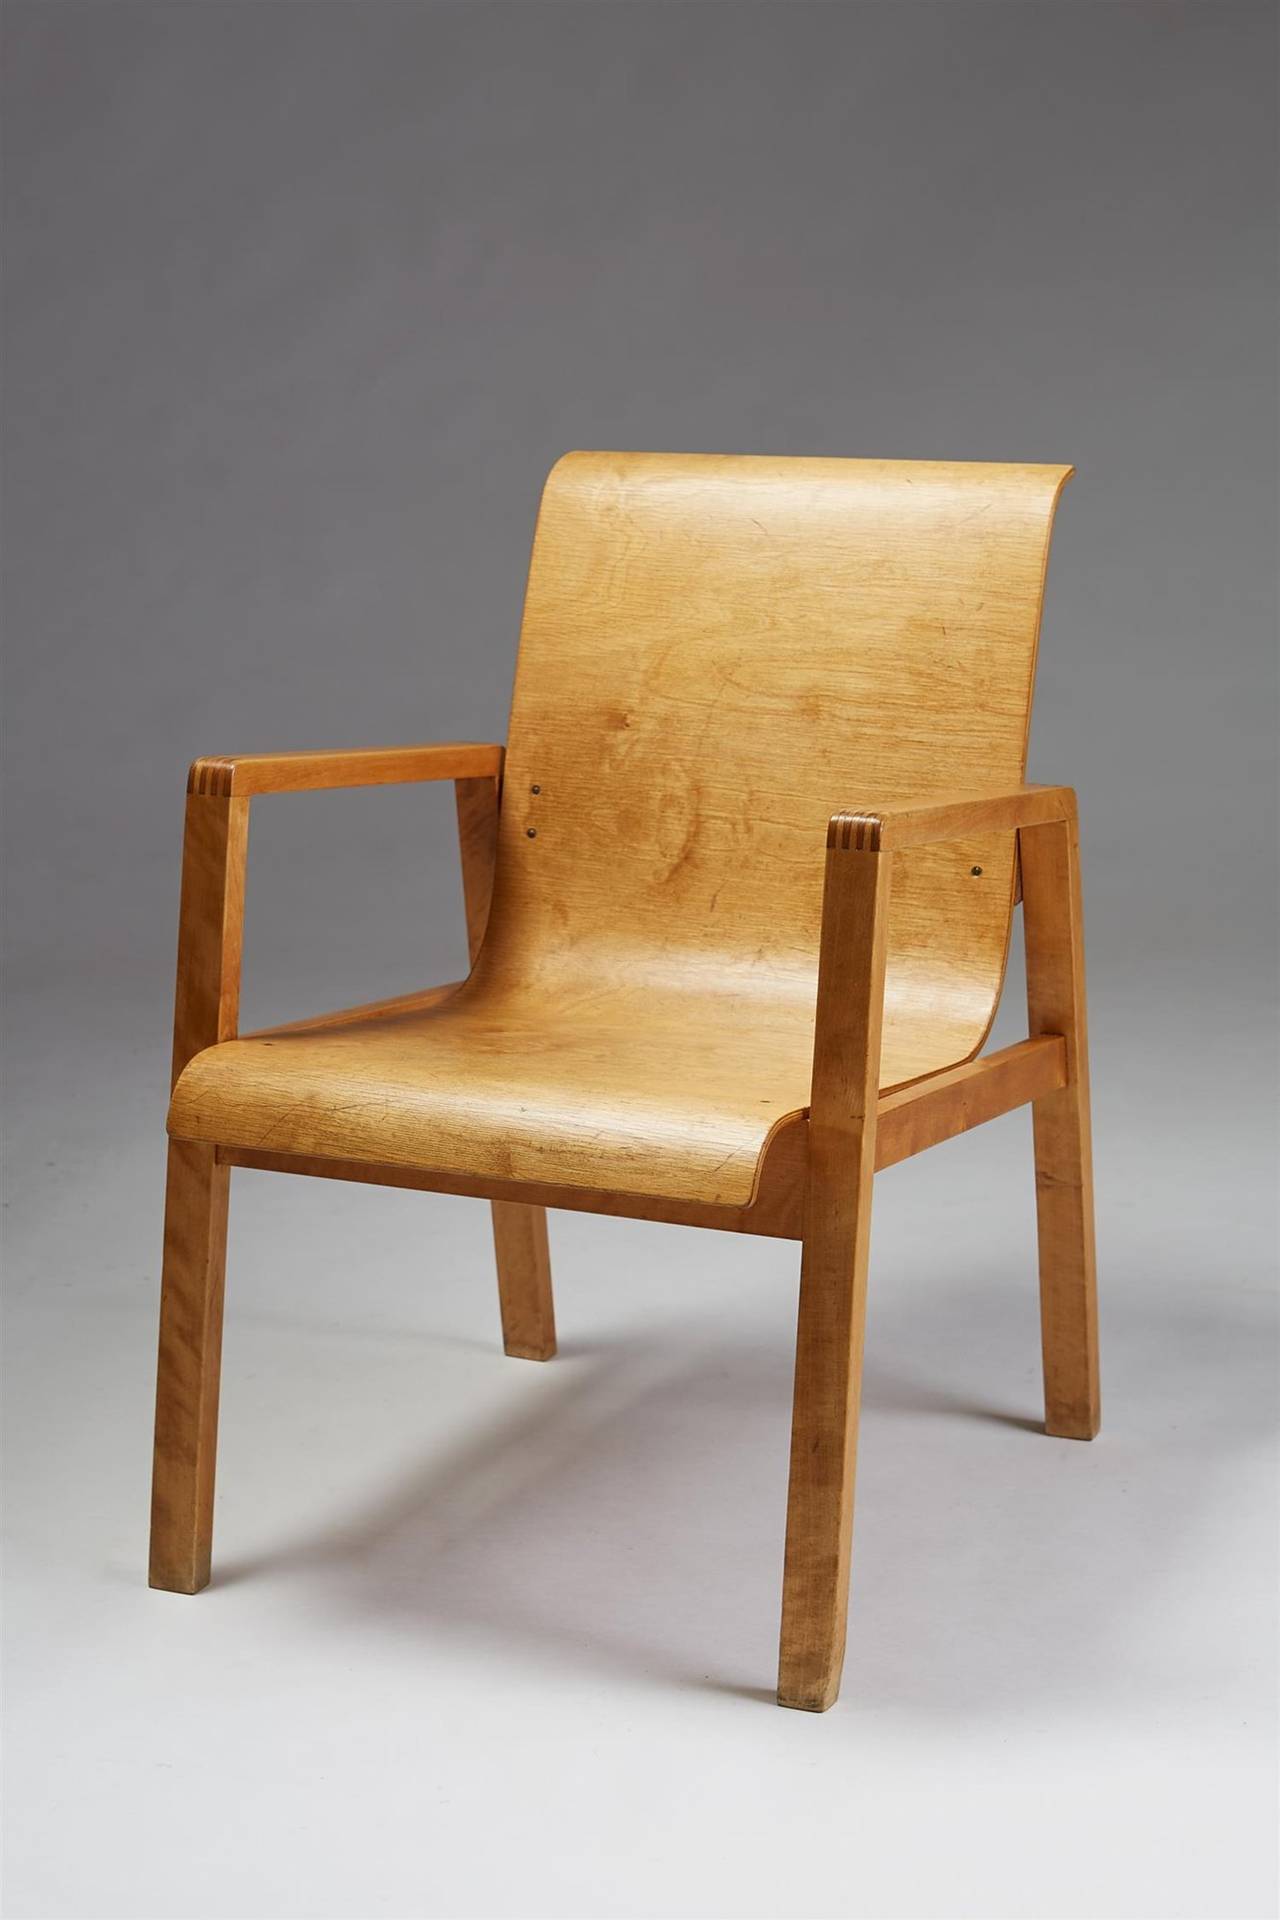 Chair in birch and plywood designed by Alvar Aalto for Artek, Finland. 1950s.